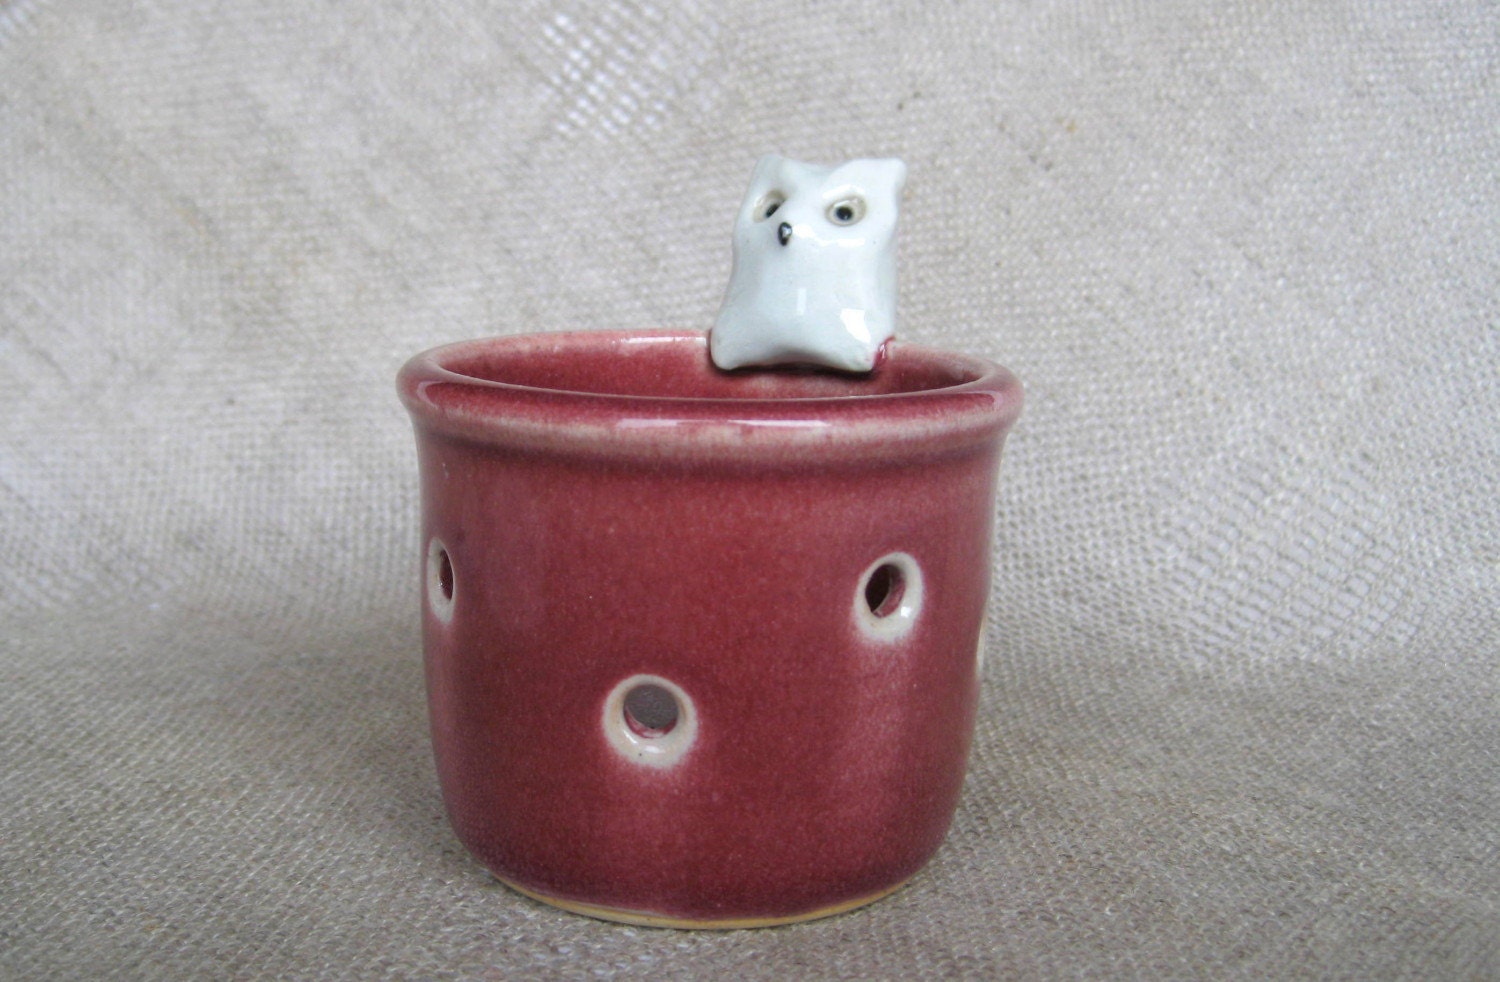 Votive candle holder with Ernie - white owl